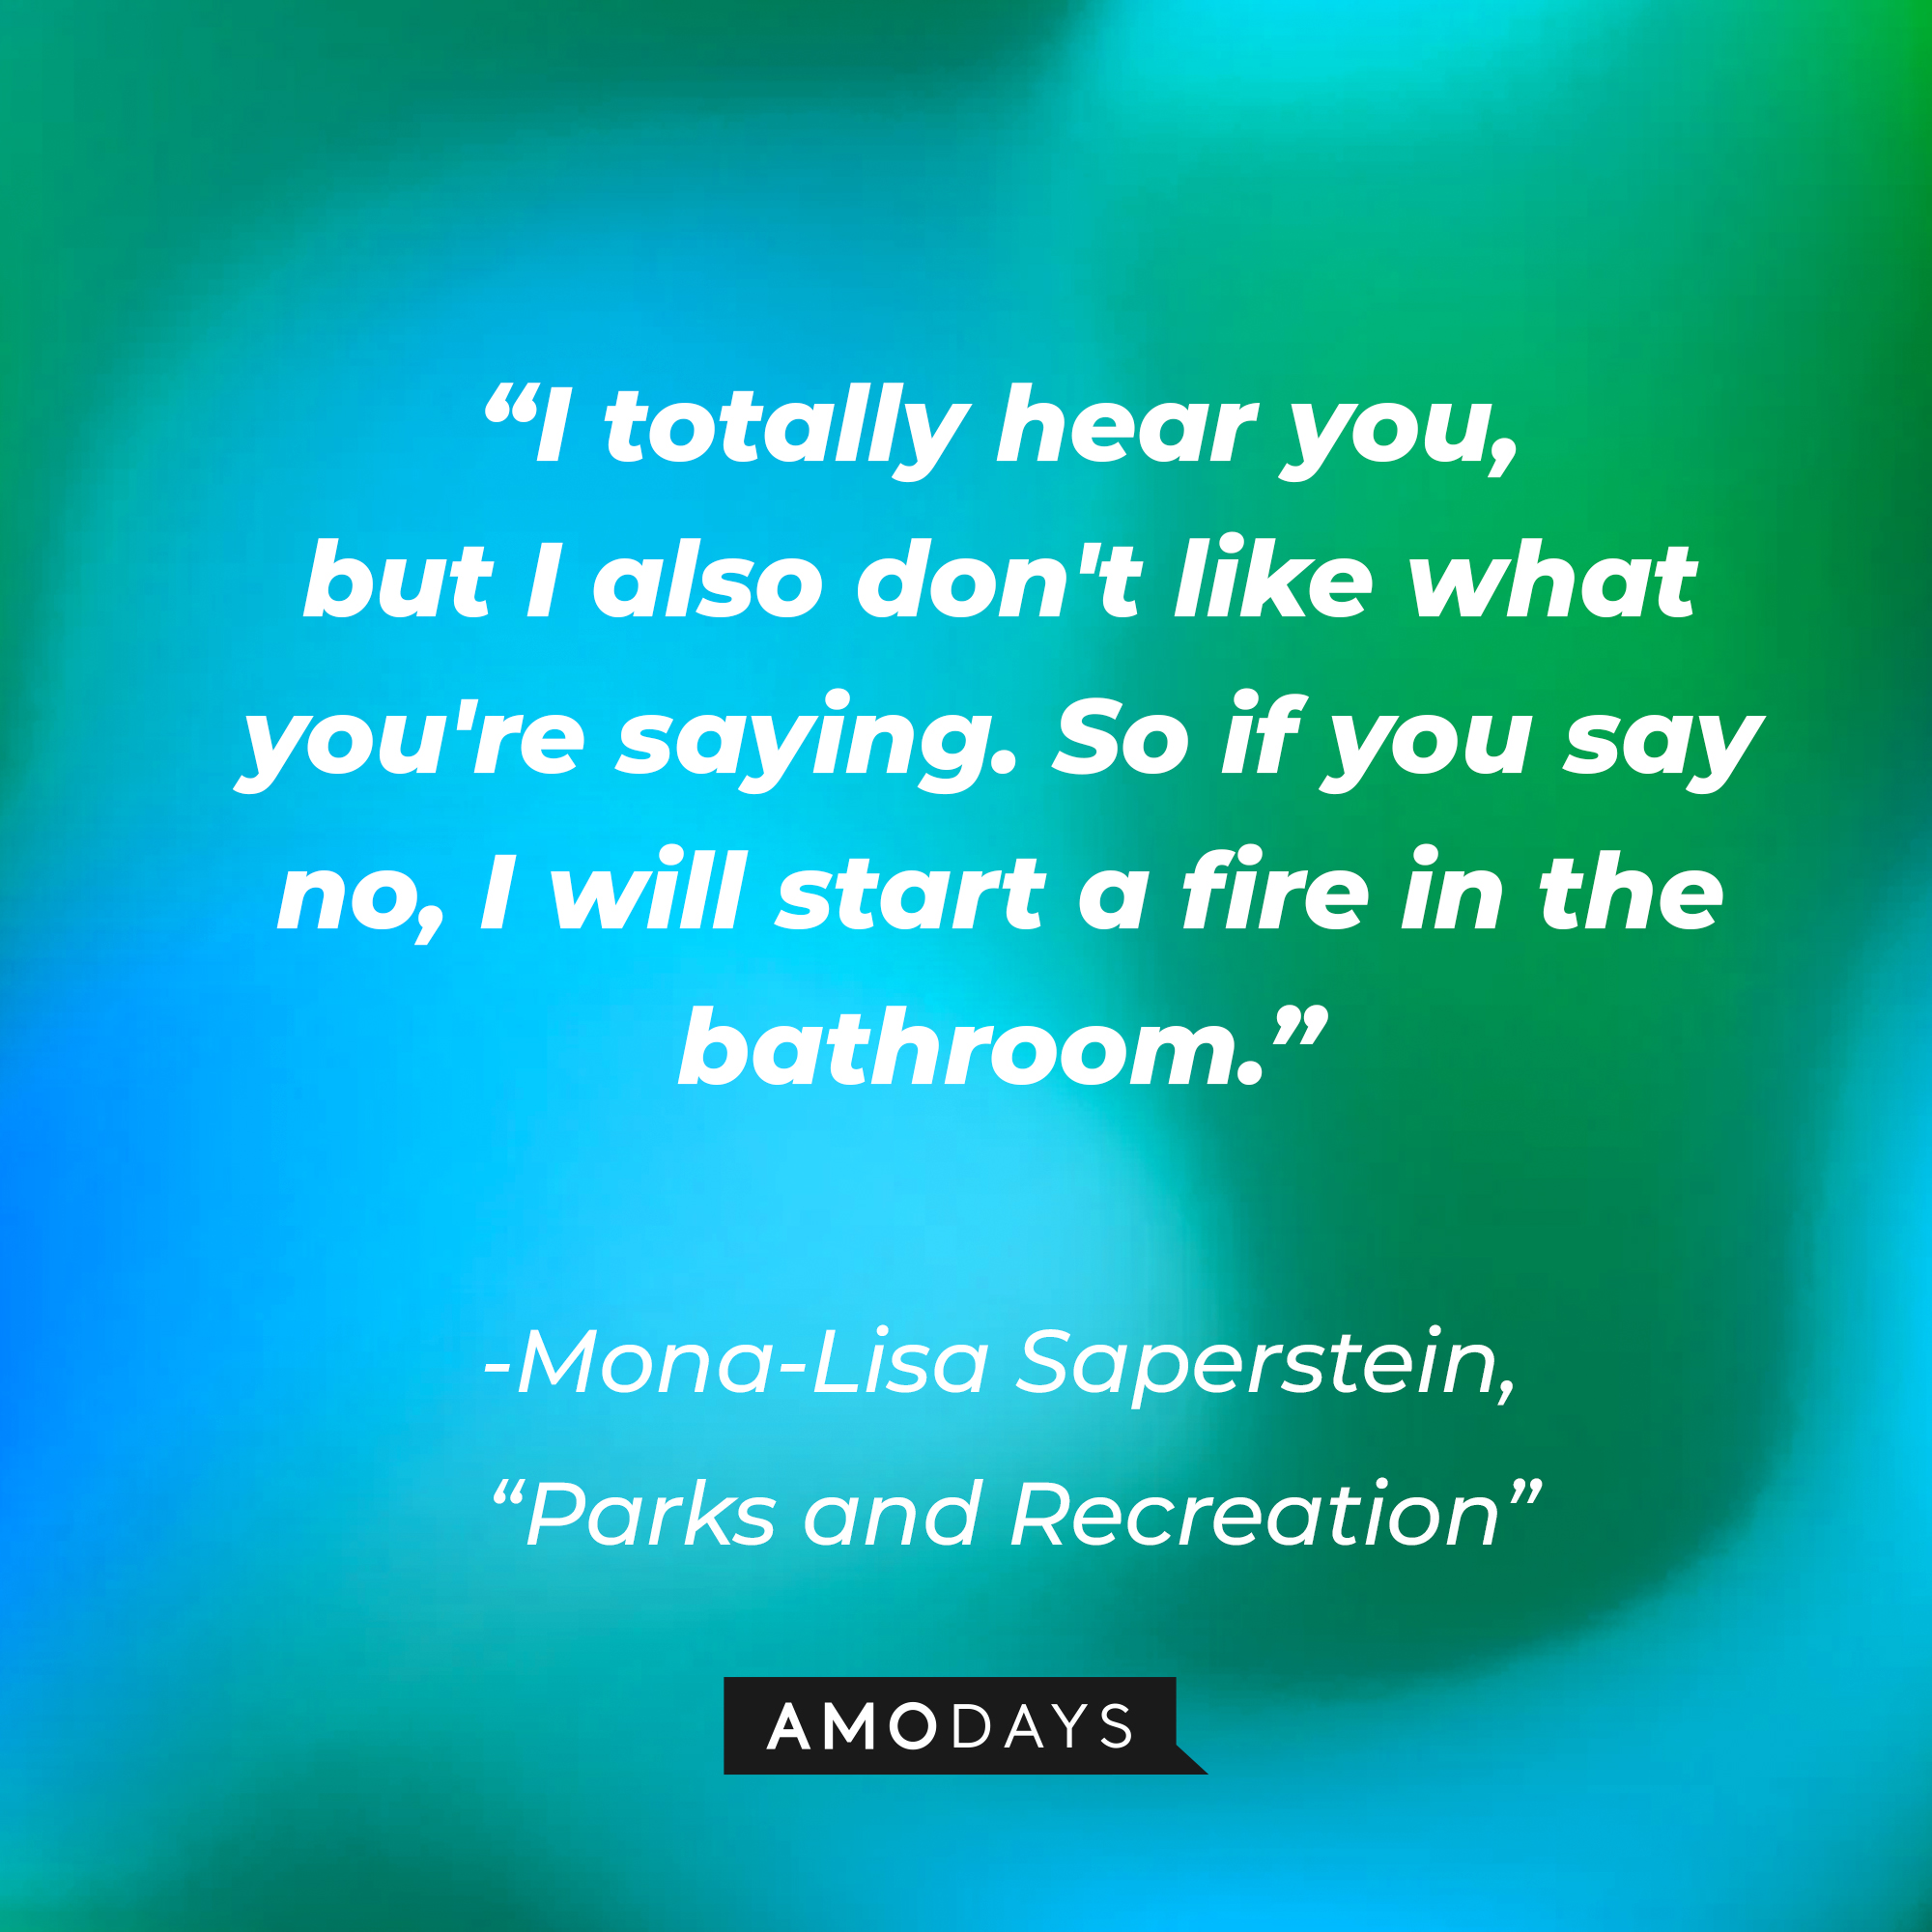 Mona-Lisa Saperstein's quote on "Parks and Recreation:" “I totally hear you, but I also don't like what you're saying. So if you say no, I will start a fire in the bathroom." | Source: AmoDays